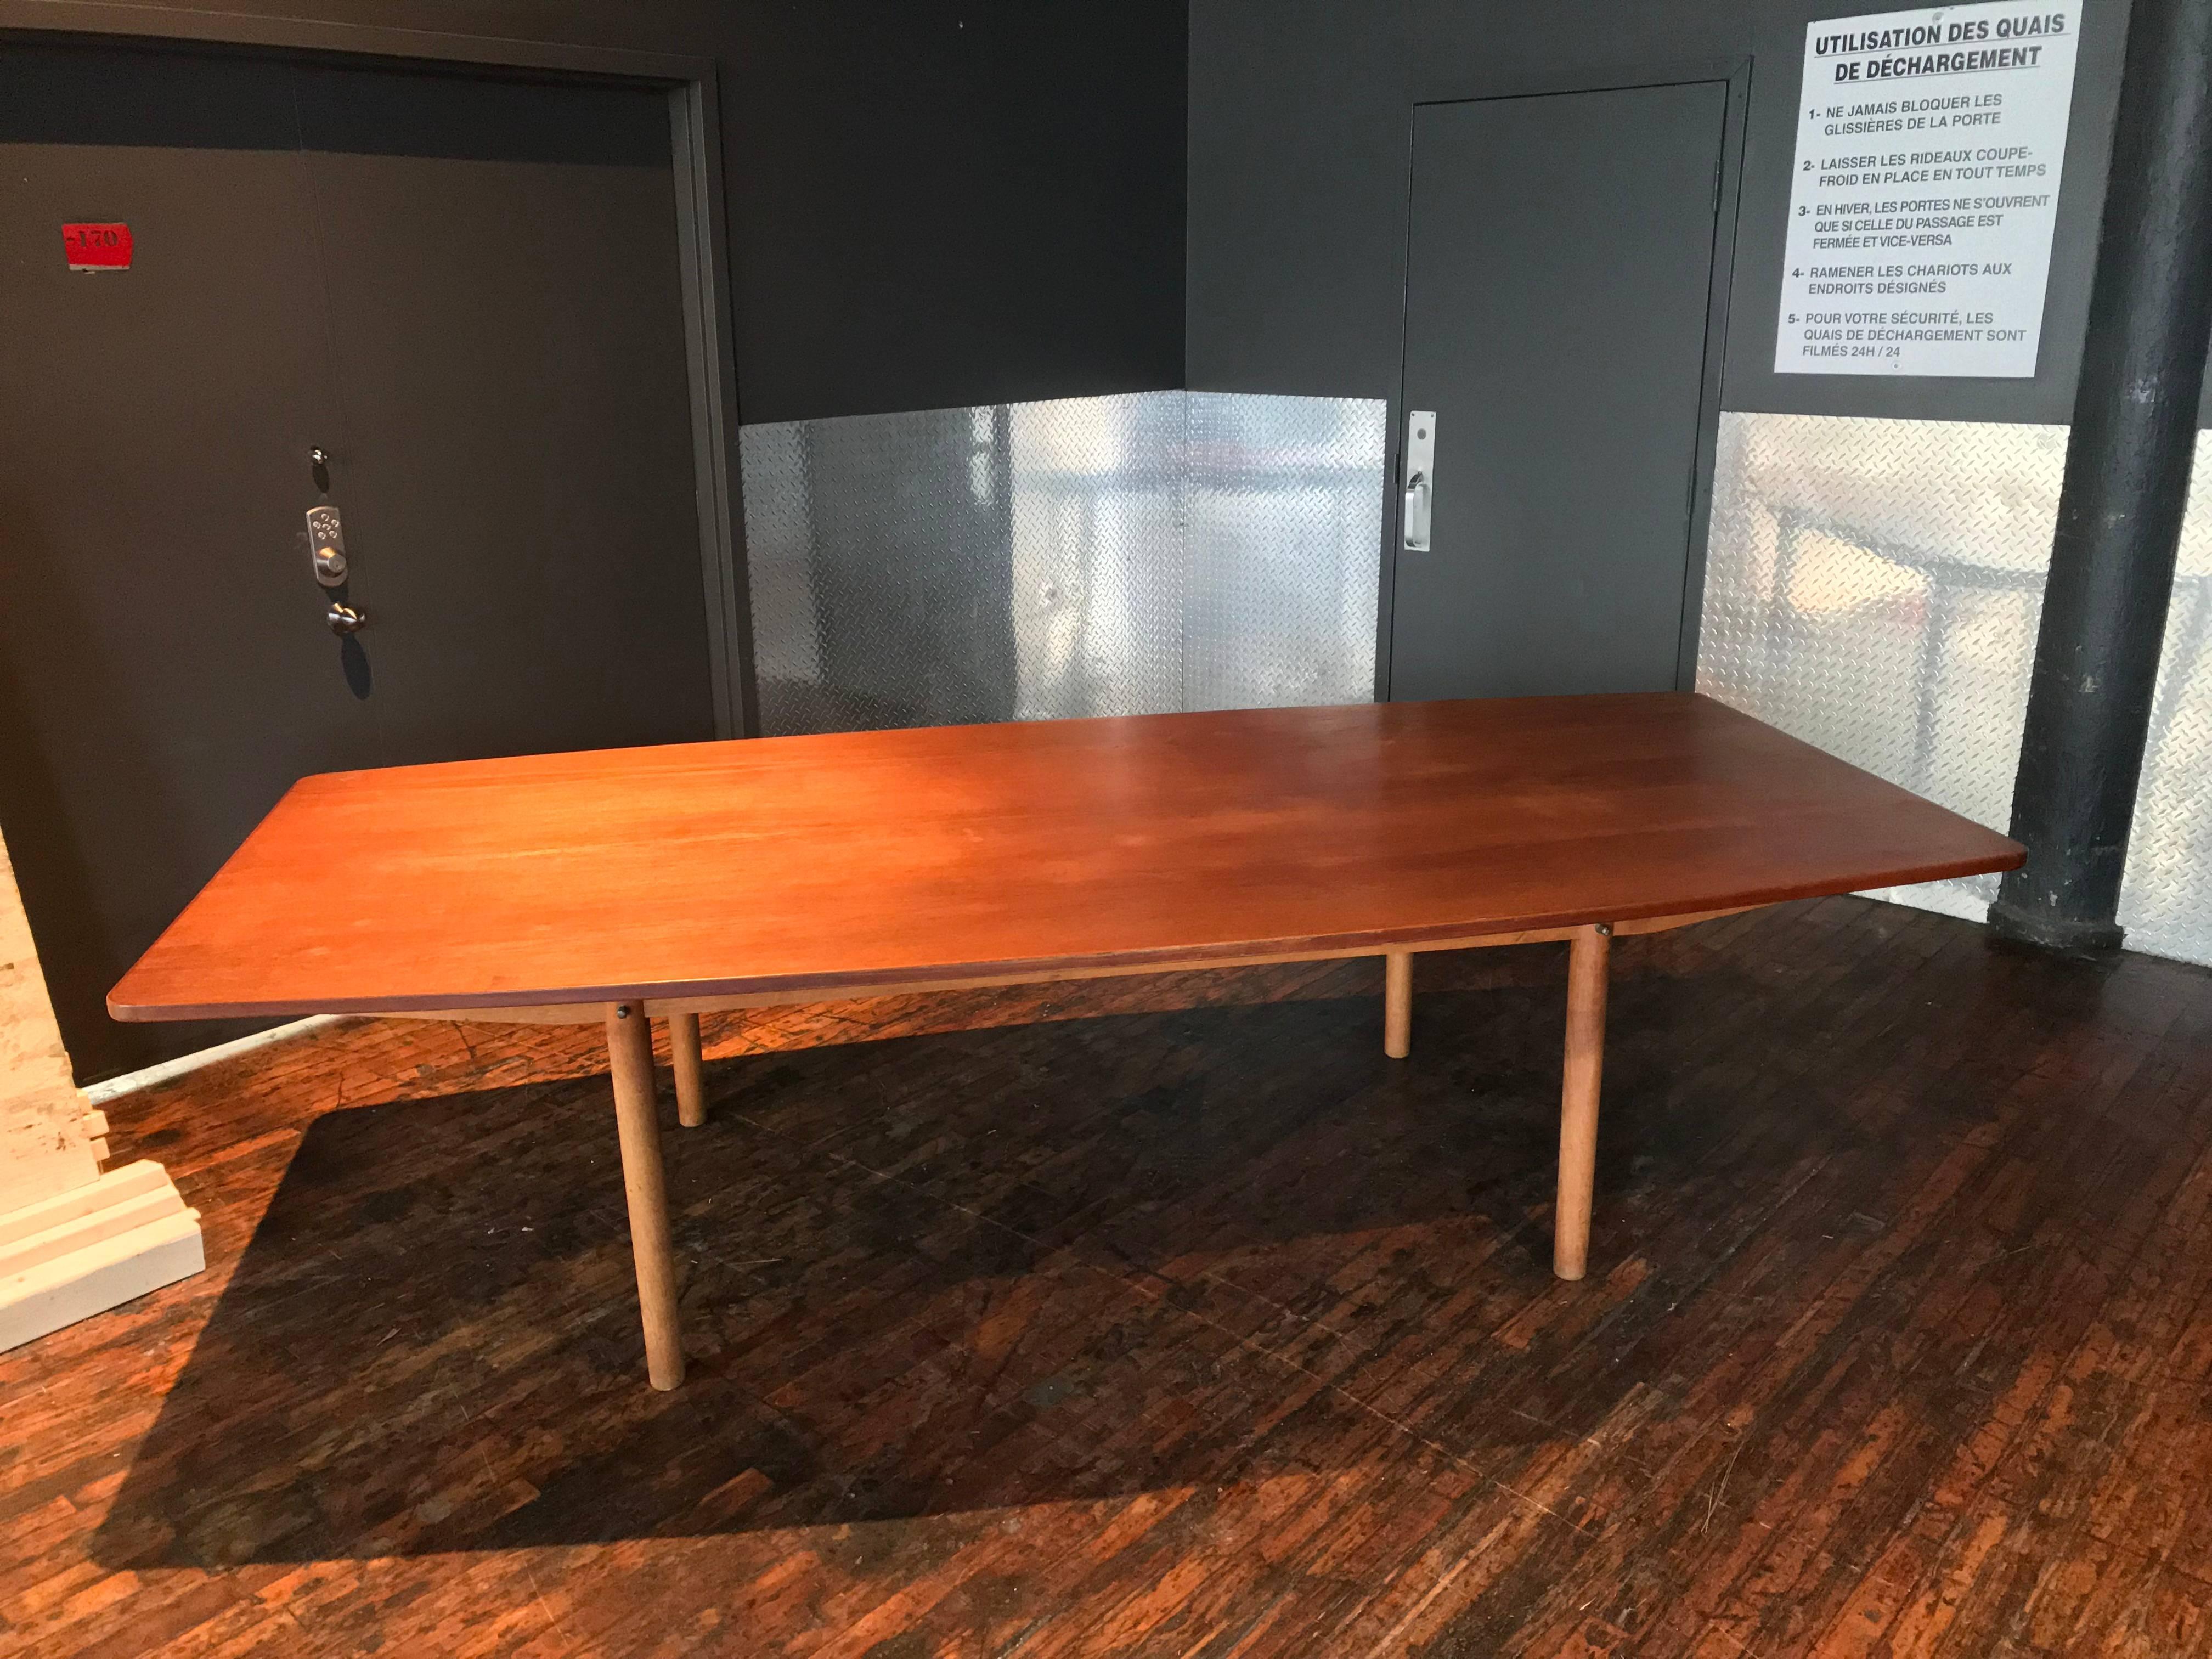 Very large teak and ash dining or conference table , the barrel shaped top showing a beautiful teak veneer on solid oak, the circumference of the top is finished solid teak trim, all resting on a solid oak four legged base.